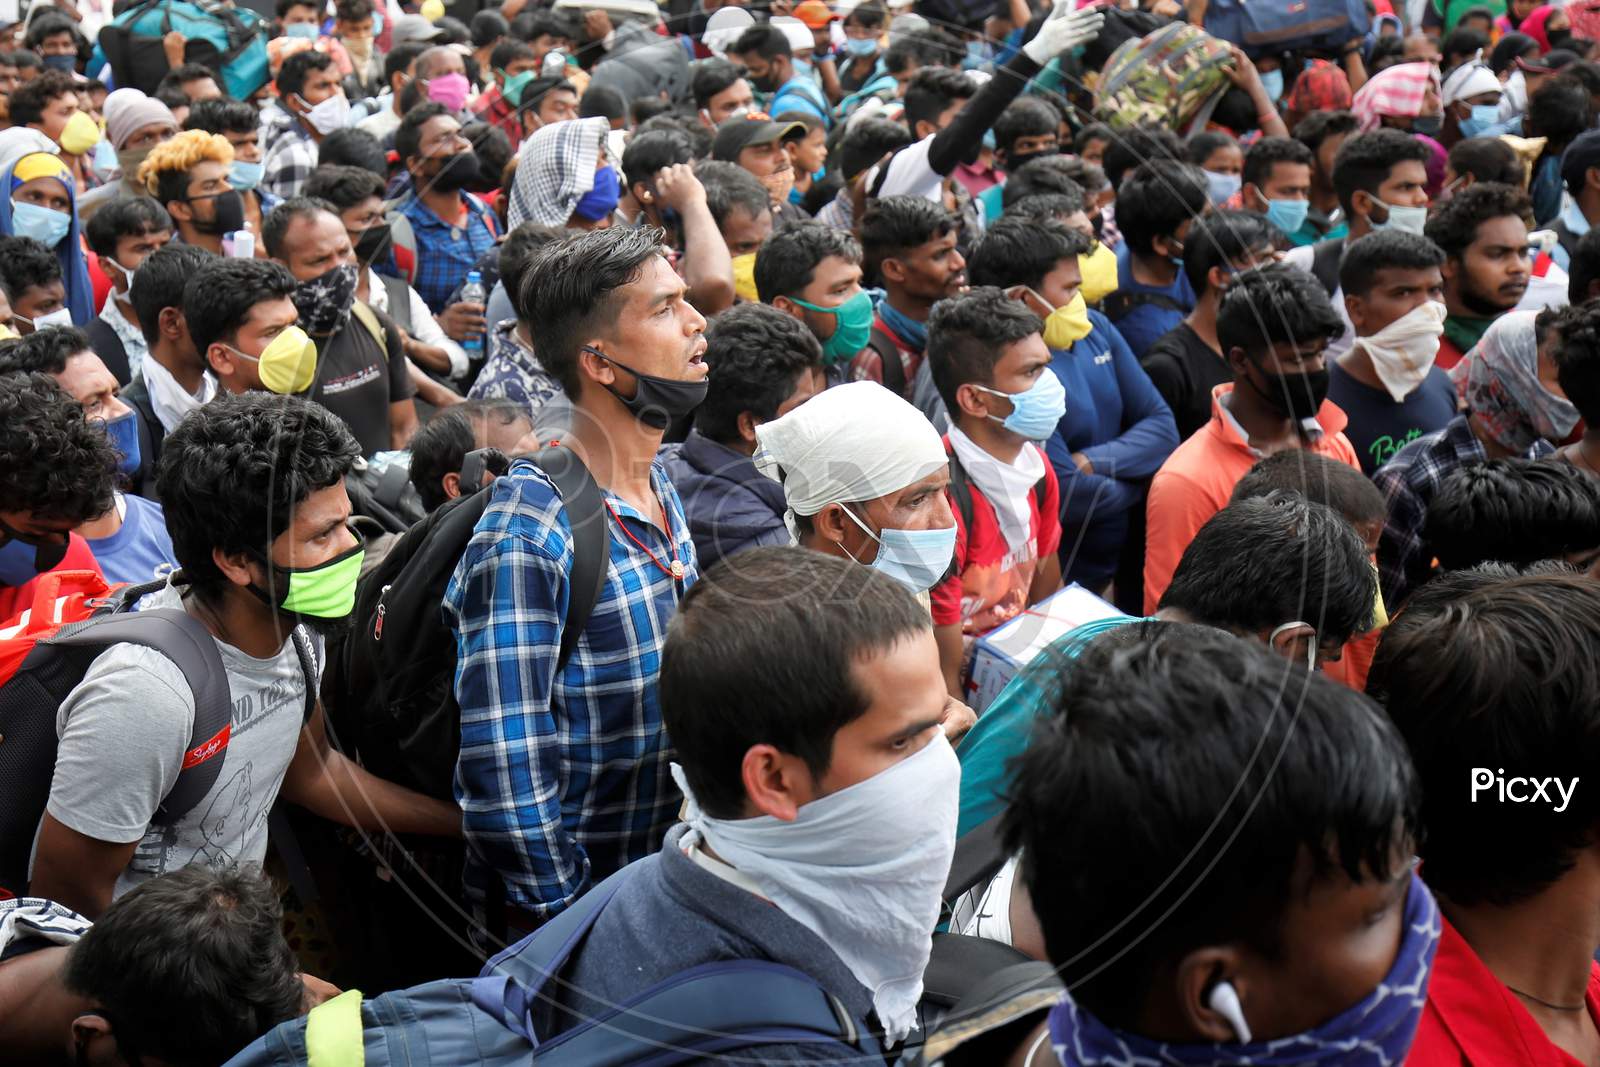 Migrant workers from Odisha wait for a health screening before boarding buses to be taken to a government-arranged train to their destination after the state eased lockdown regulations during the extended nationwide lockdown to prevent the spread of coronavirus (Covid-19) in Bangalore, India.